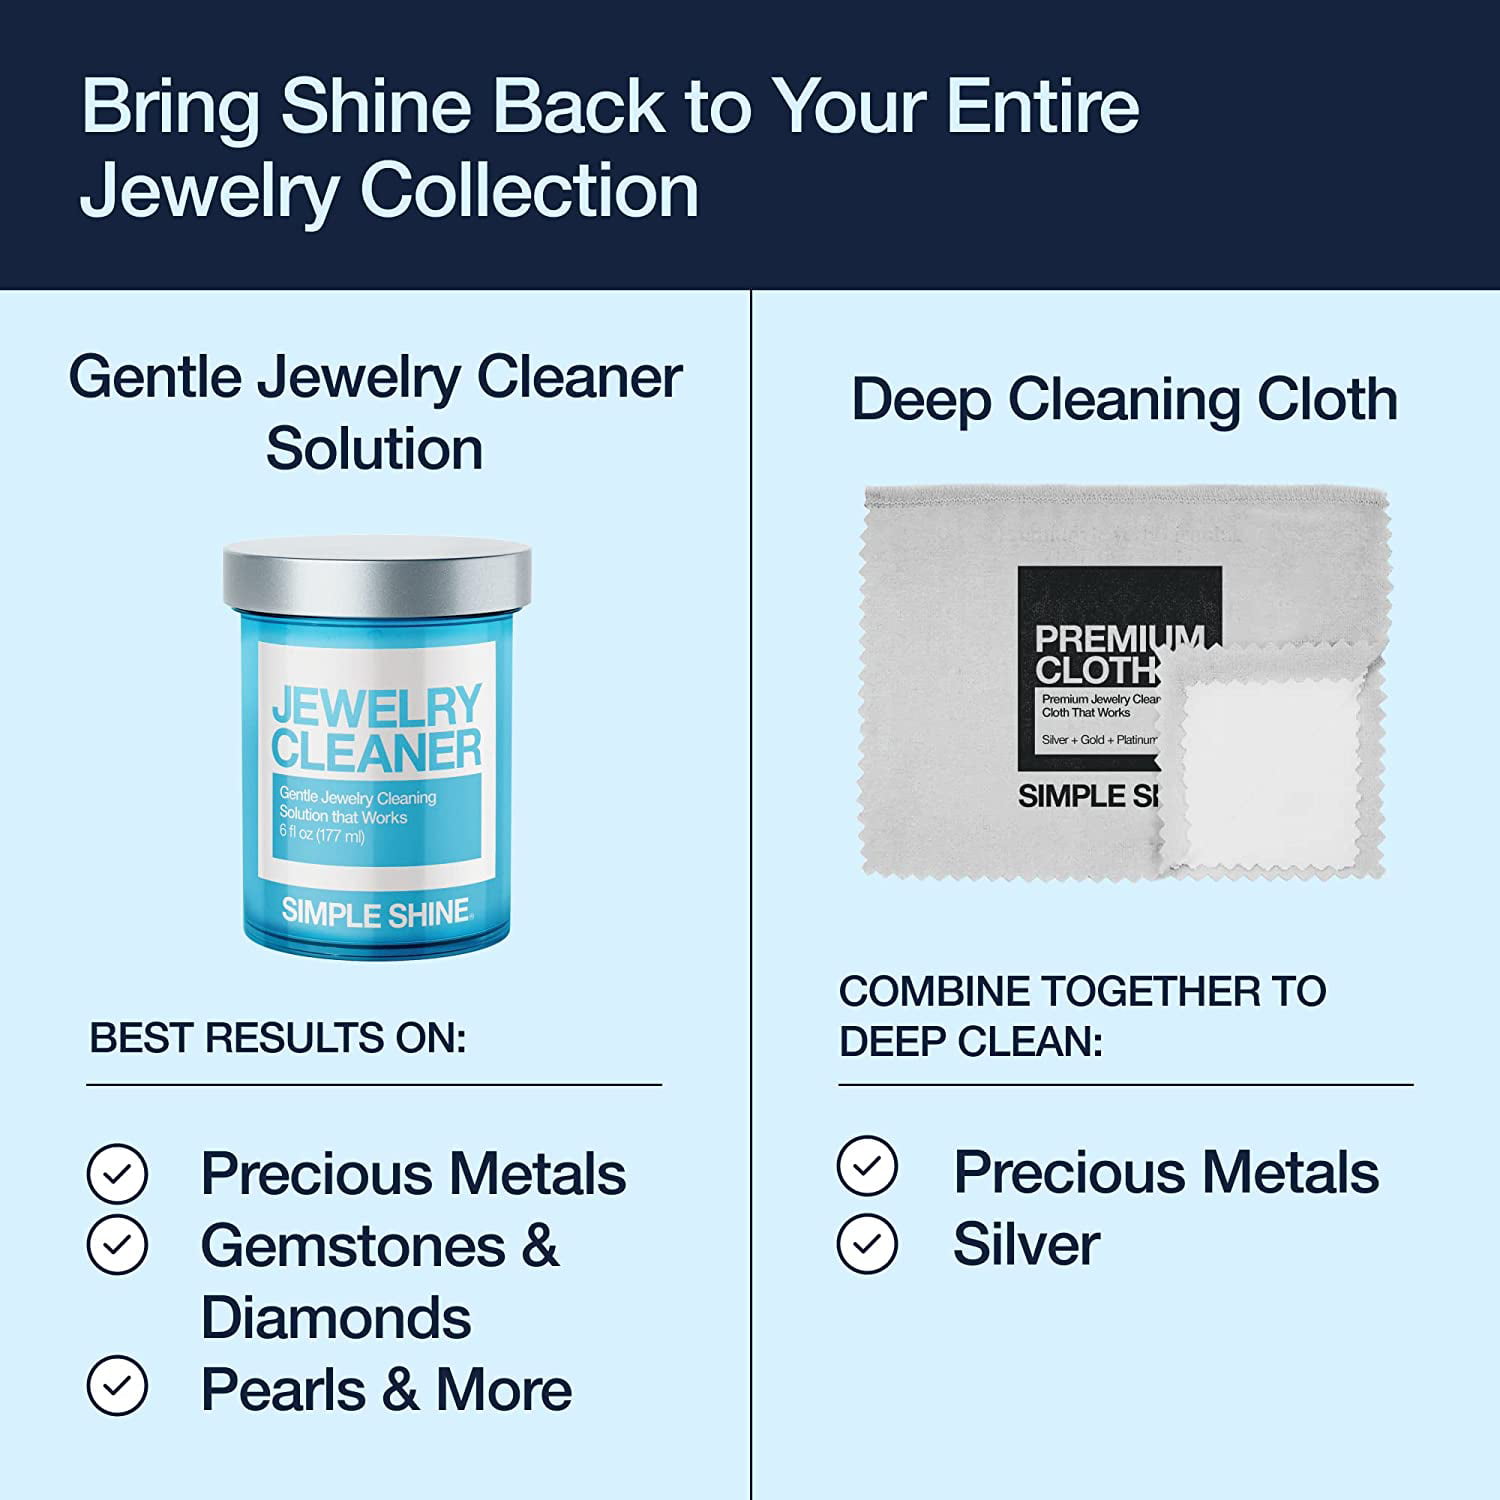 Simple Shine Set of 3 Premium Jewelry Cleaning Cloths – Online